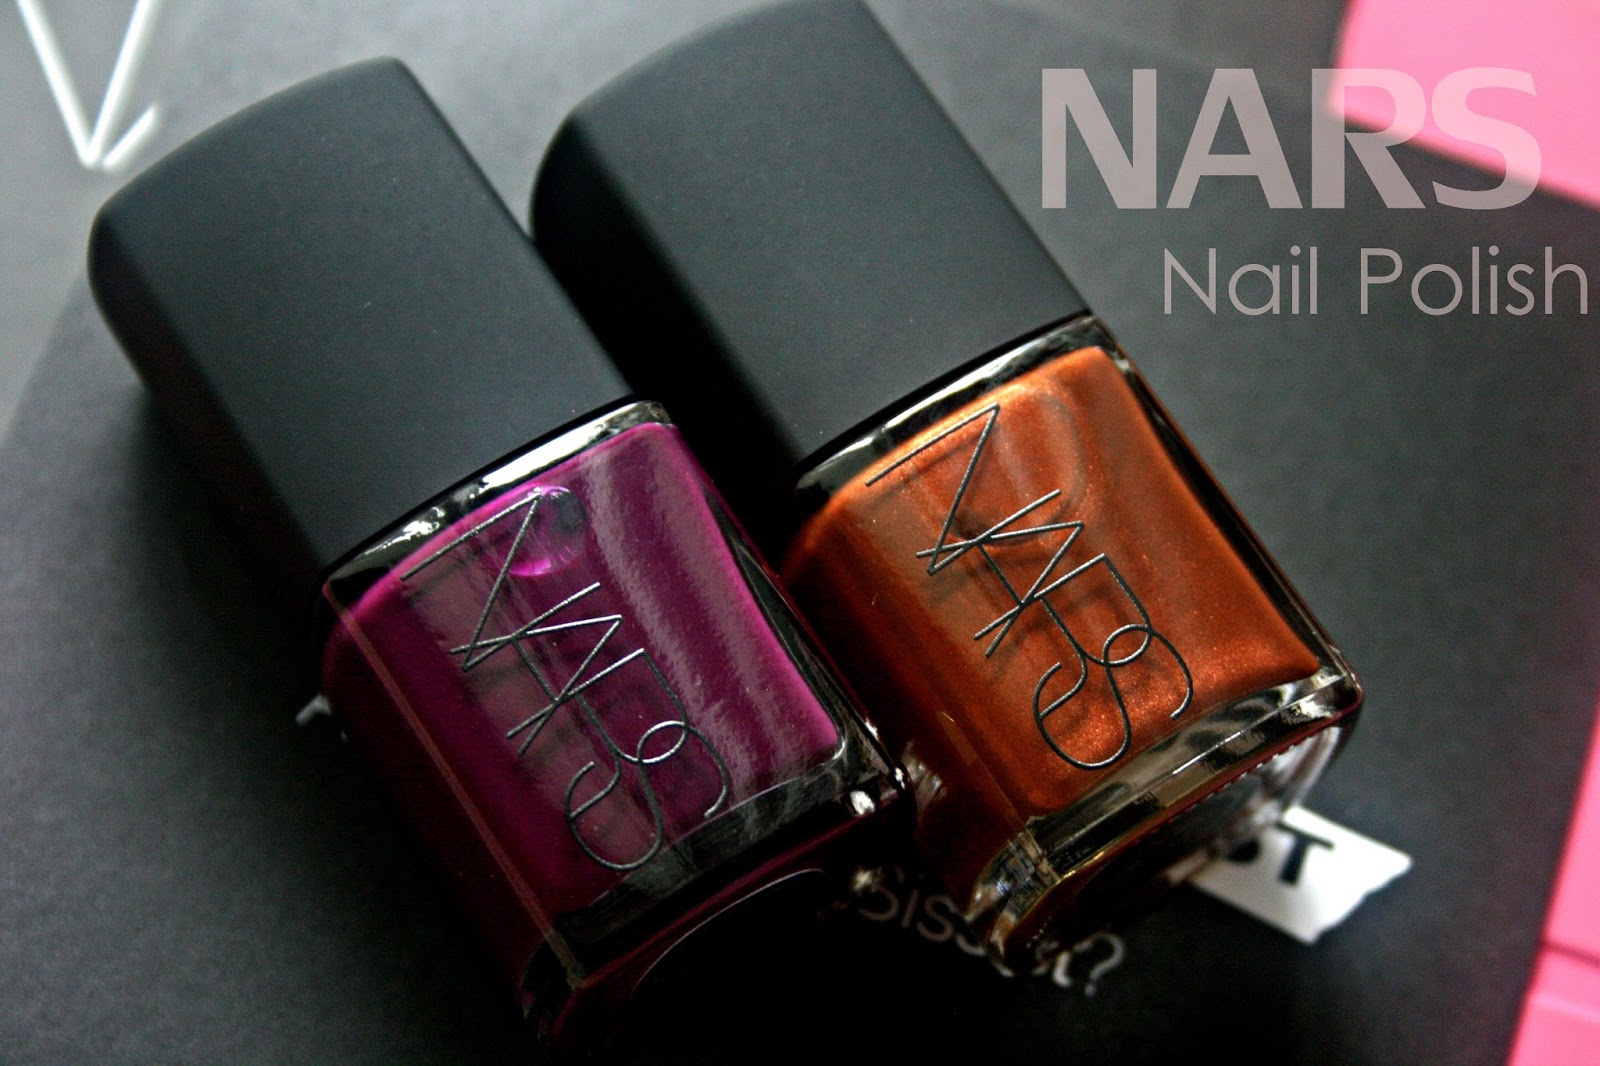 Makeup, Beauty and More: NARS Re-Formulated Nail Polishes in Delos and  Elbrus